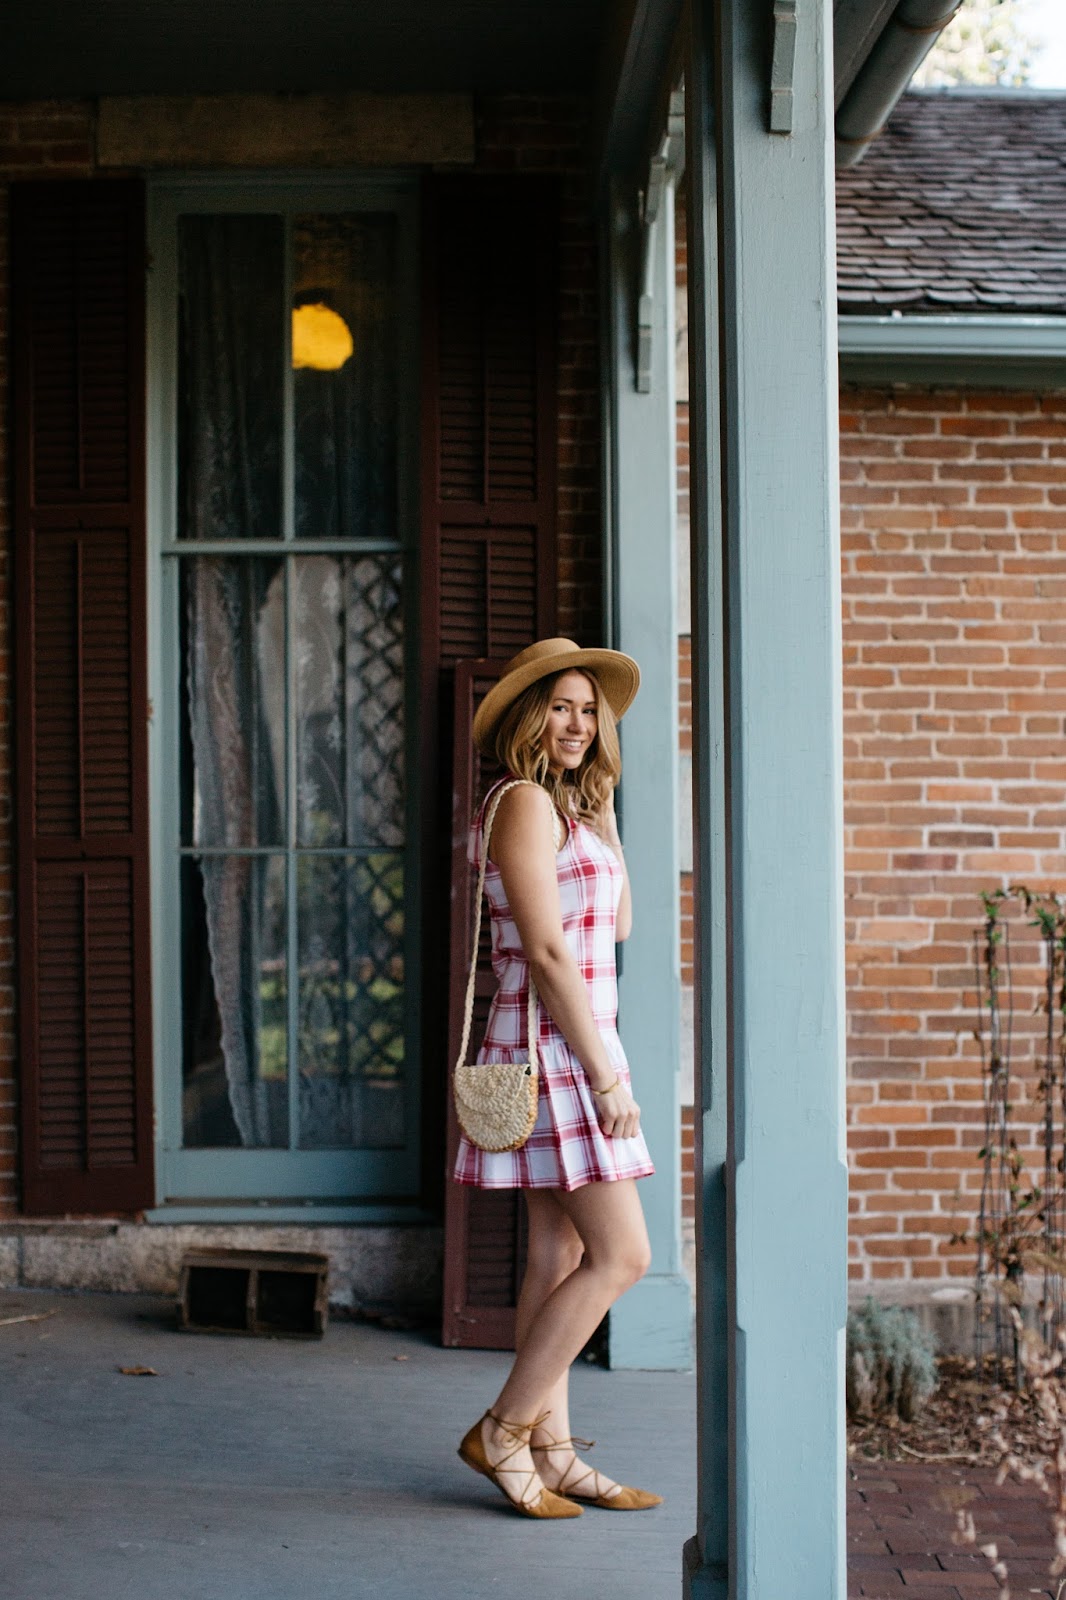 Red Check Dress With Boater Hat